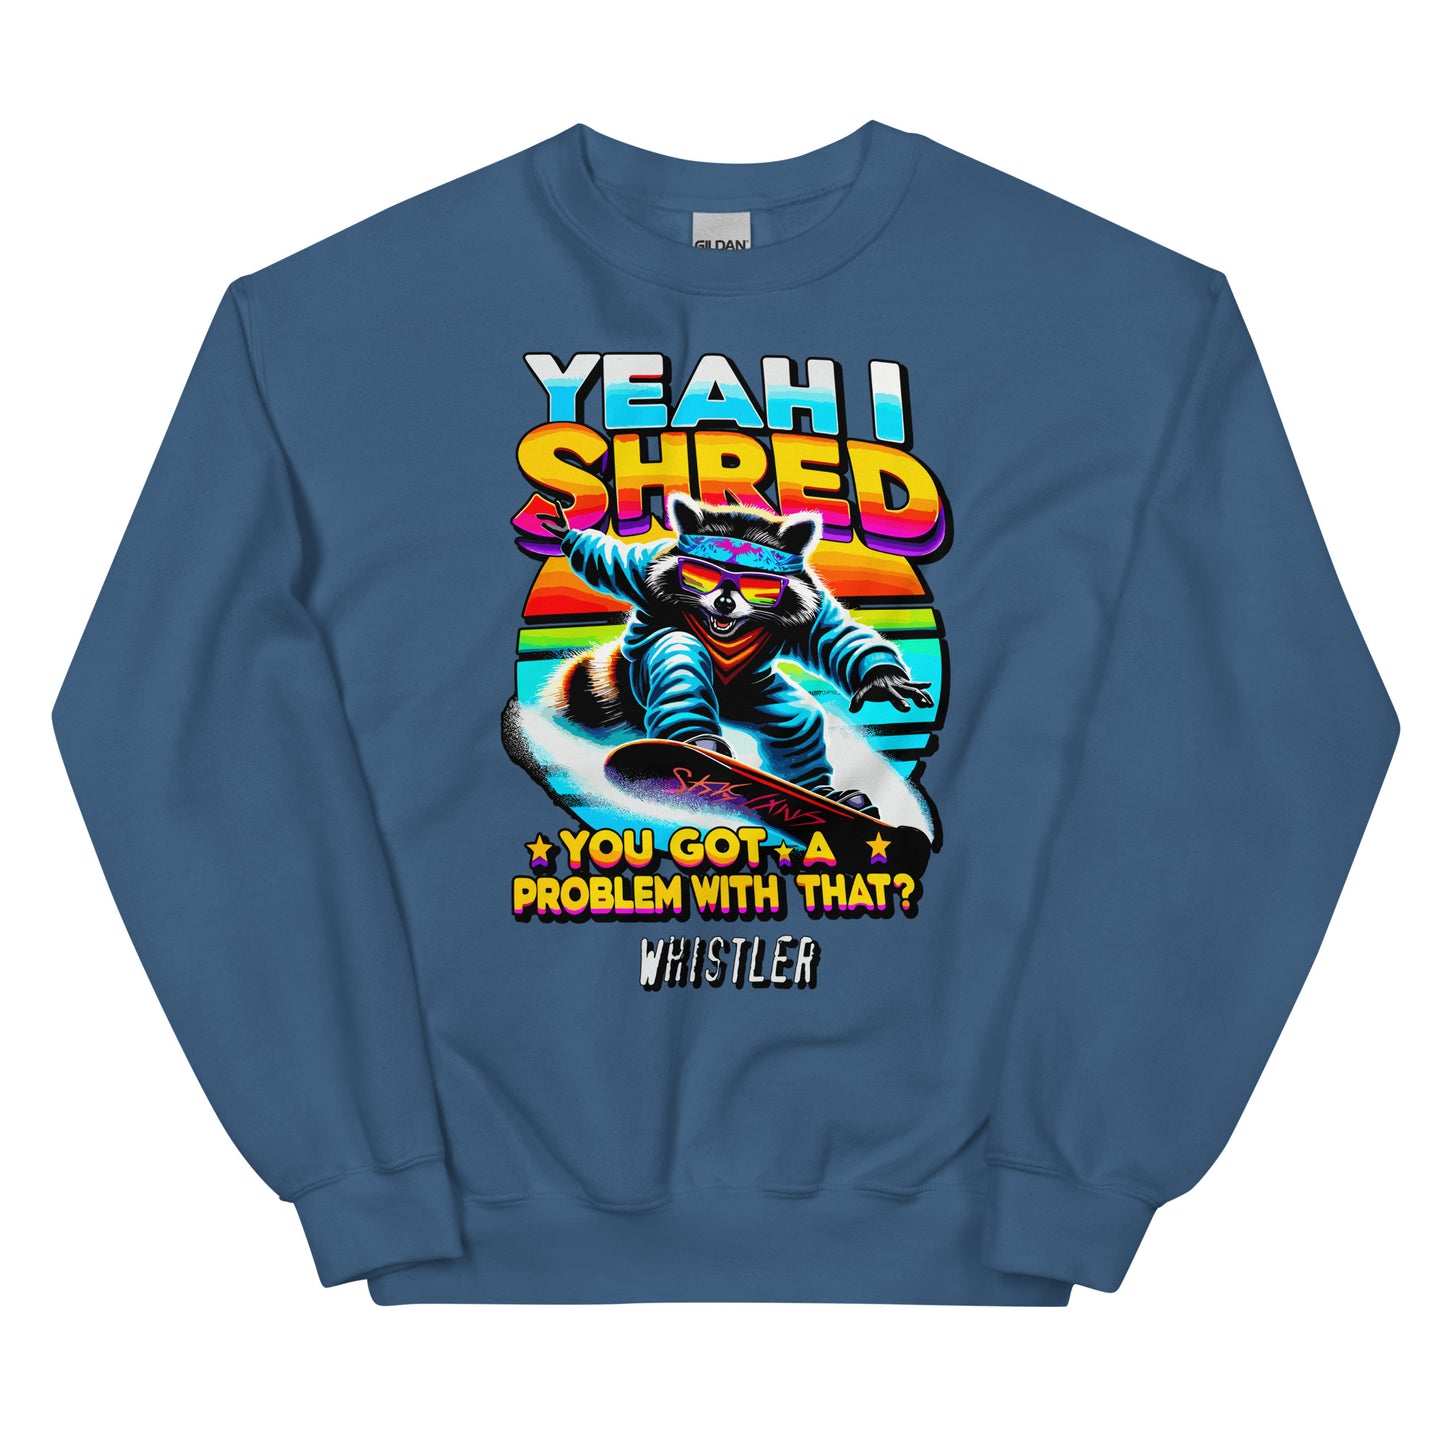 Yeah I shred you got a problem with that? Whistler with a racoon snowboarding printed on crewneck sweatshirt by Whistler Shirts